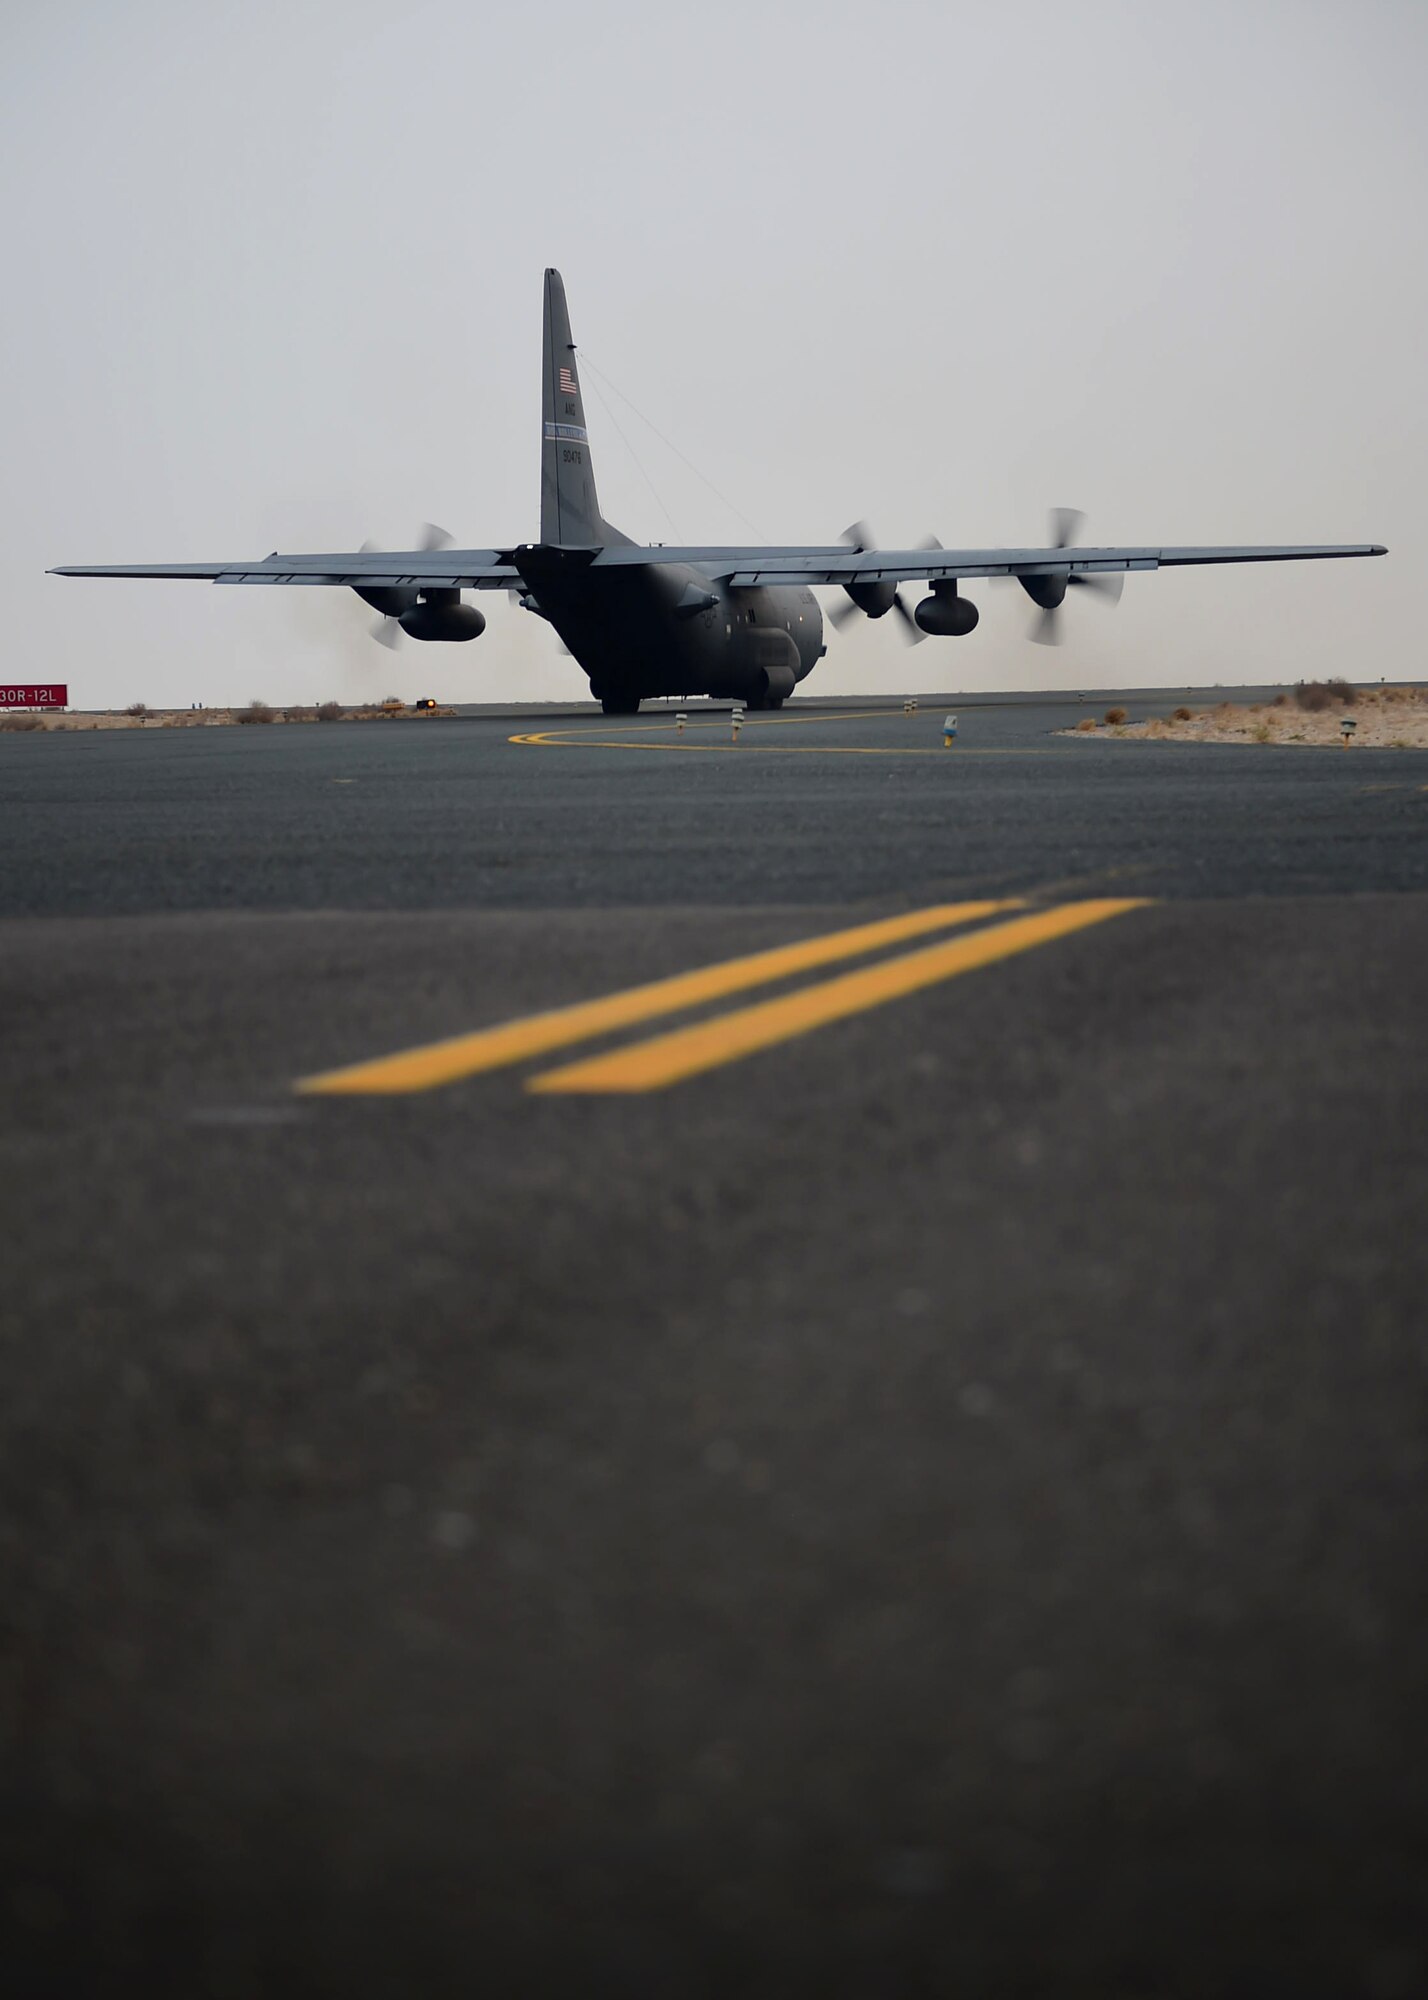 A C-130H Hercules taxis down the runway prior to takeoff at an undisclosed location in Southwest Asia, Oct. 29, 2015. More than two hundred Airmen from the 165th Airlift Wing based out of Savannah, Georgia and the 192nd Airlift Squadron based out of Reno, Nevada deployed to provide support for Operation INHERENT RESOLVE. (U.S. Air Force photo by Staff Sgt. Jerilyn Quintanilla)